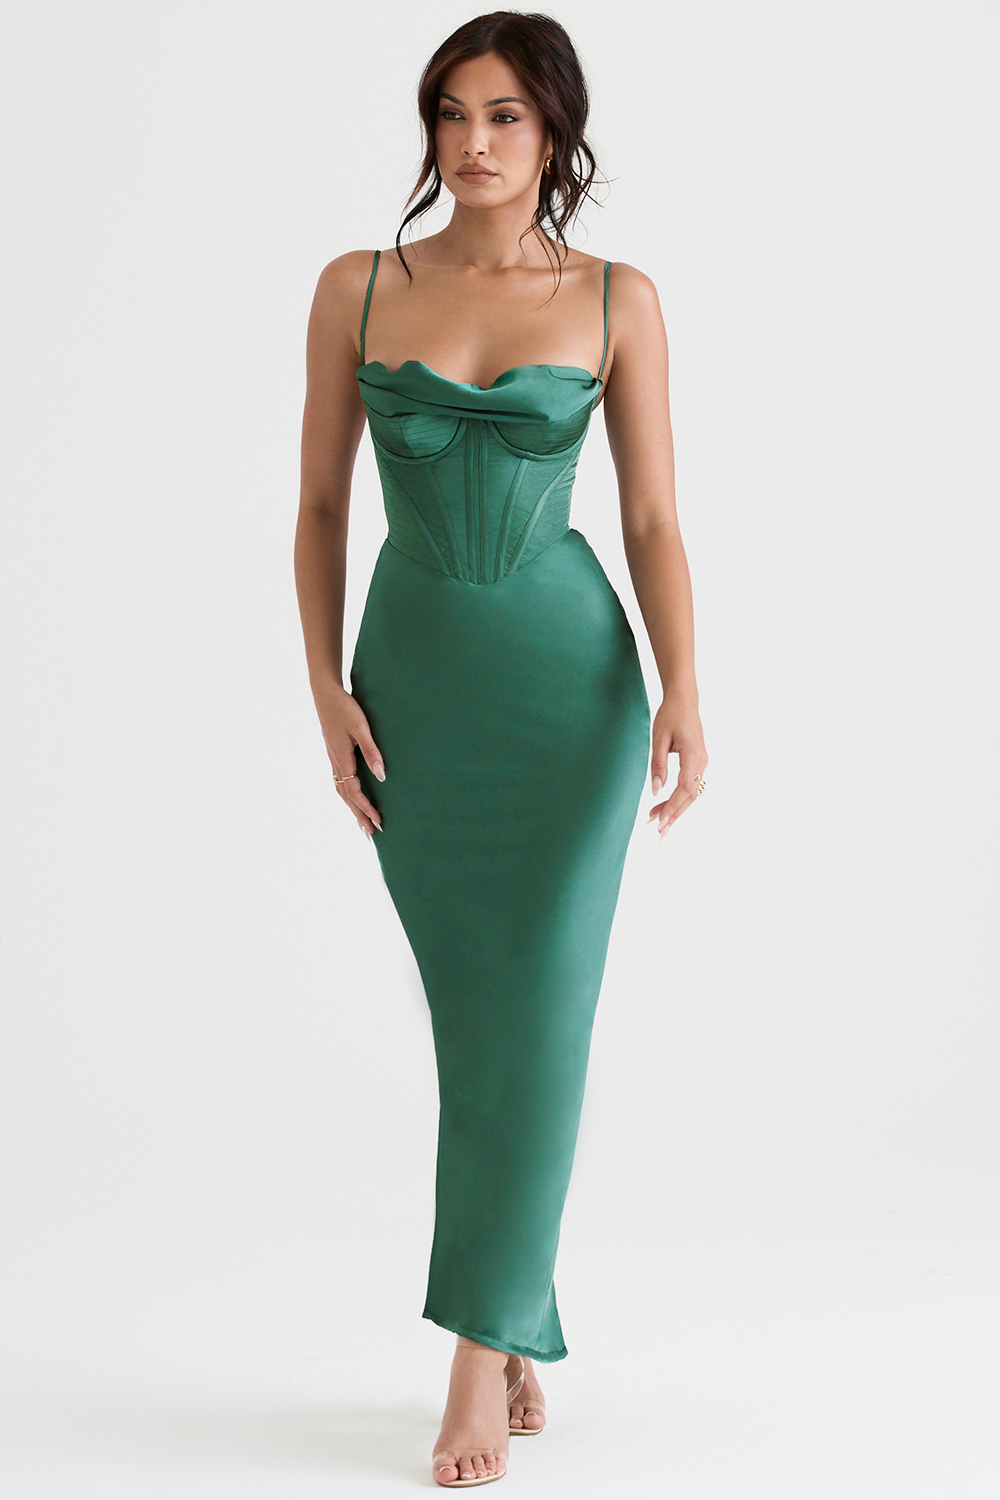 House of CB Charmaine Forest Corset Maxi Dress - Get Dressed Hire